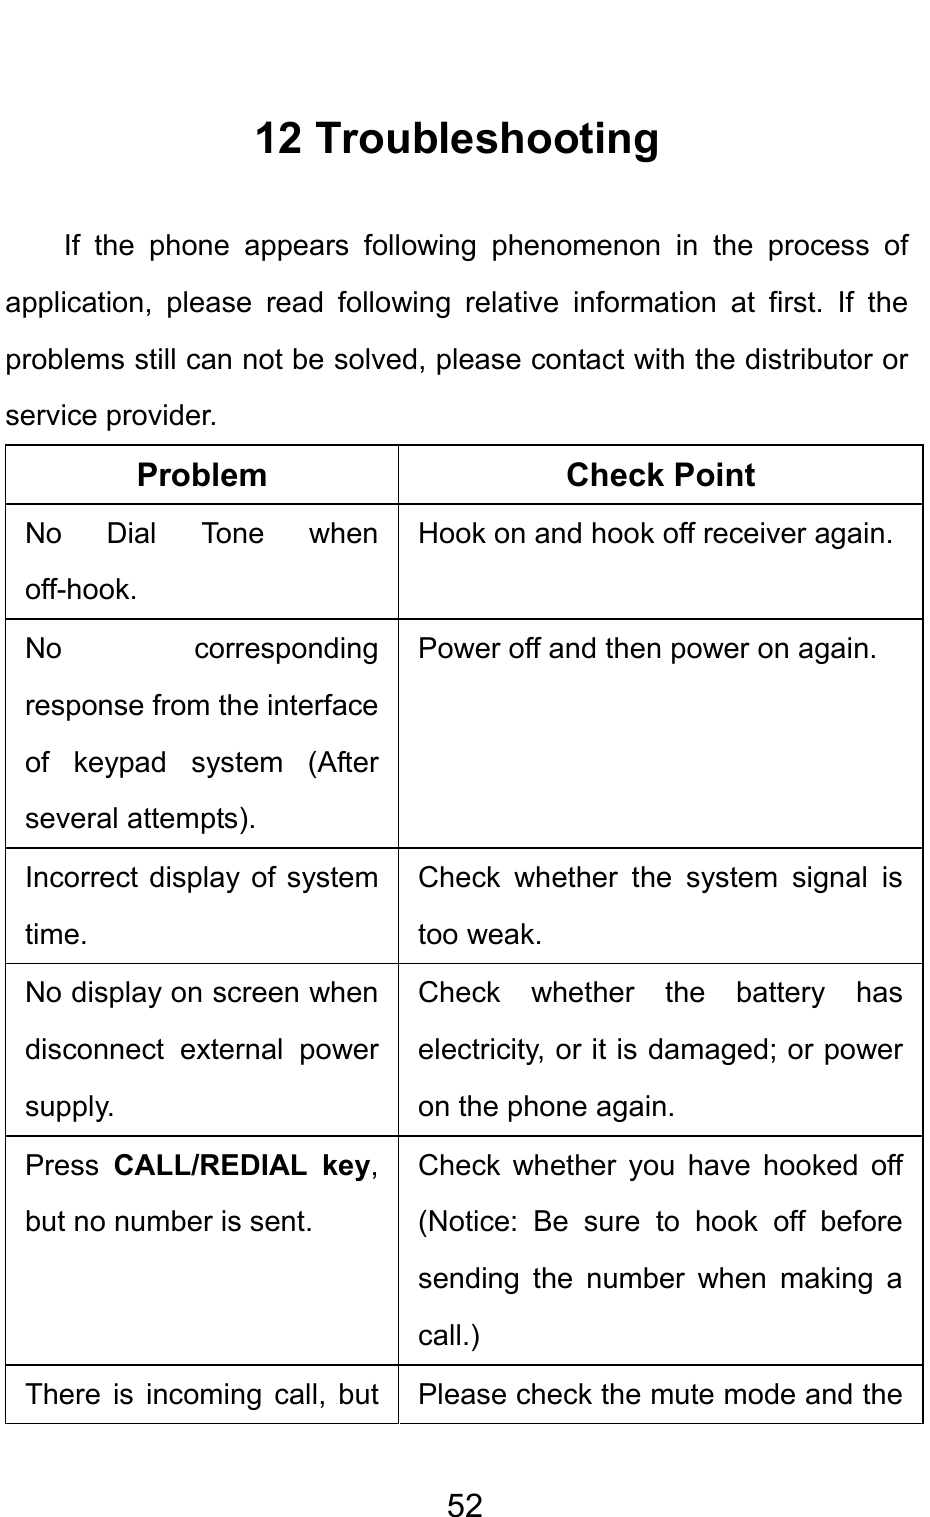                                     5212 Troubleshooting If the phone appears following phenomenon in the process of application, please read following relative information at first. If the problems still can not be solved, please contact with the distributor or service provider. Problem Check Point No Dial Tone when off-hook. Hook on and hook off receiver again.No corresponding response from the interface of keypad system (After several attempts). Power off and then power on again. Incorrect display of system time. Check whether the system signal is too weak. No display on screen when disconnect external power supply. Check whether the battery has electricity, or it is damaged; or power on the phone again. Press  CALL/REDIAL key, but no number is sent. Check whether you have hooked off (Notice: Be sure to hook off before sending the number when making a call.) There is incoming call, but  Please check the mute mode and the 